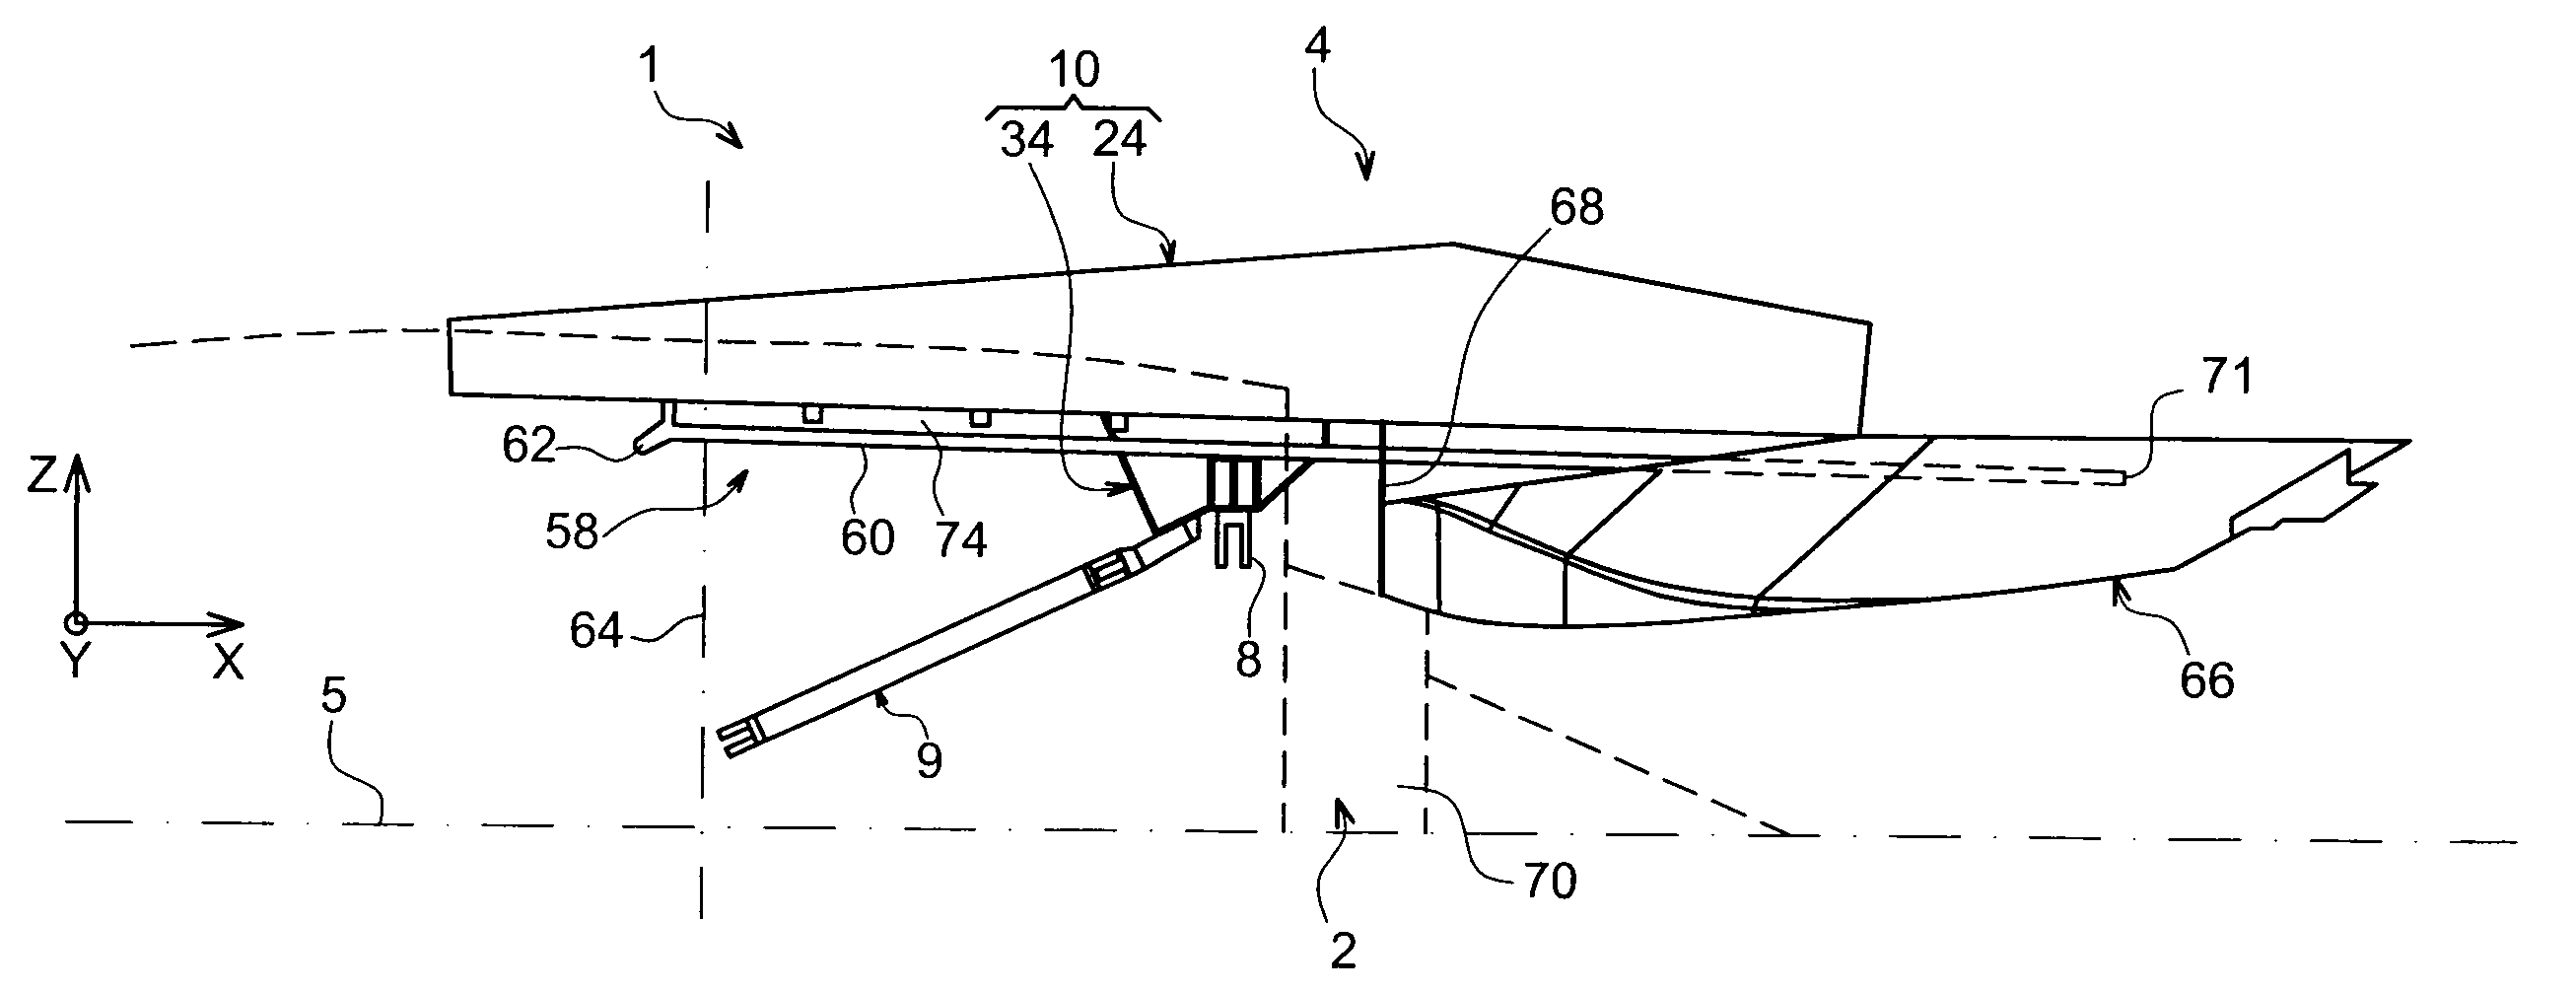 Mounting assembly for securing an engine to an aircraft wing